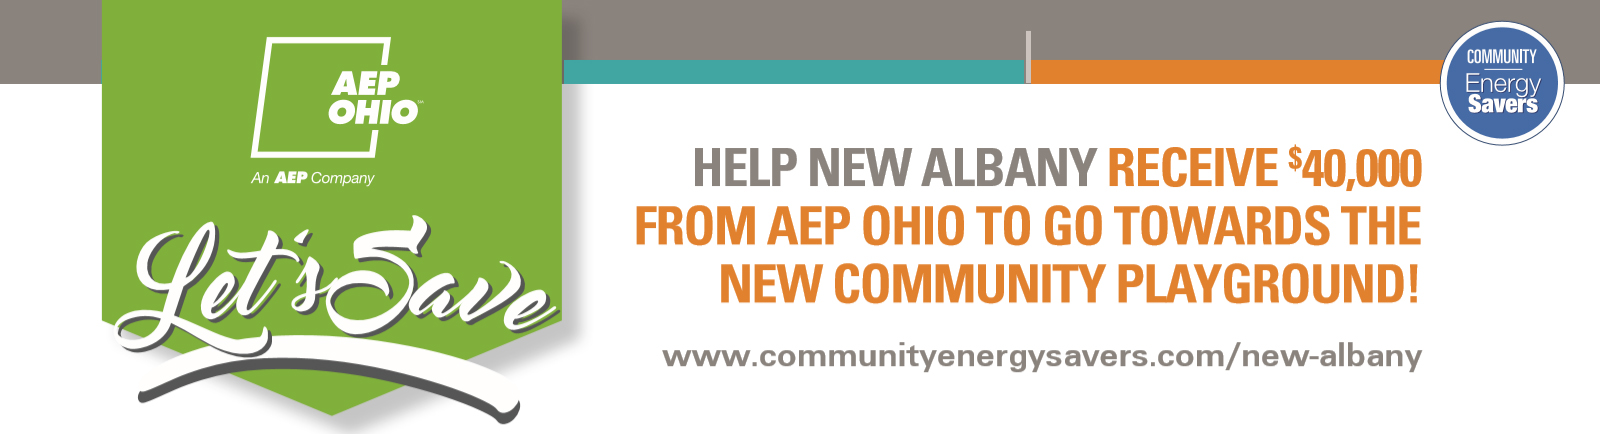 help-city-schools-earn-40-000-from-aep-ohio-for-a-new-community